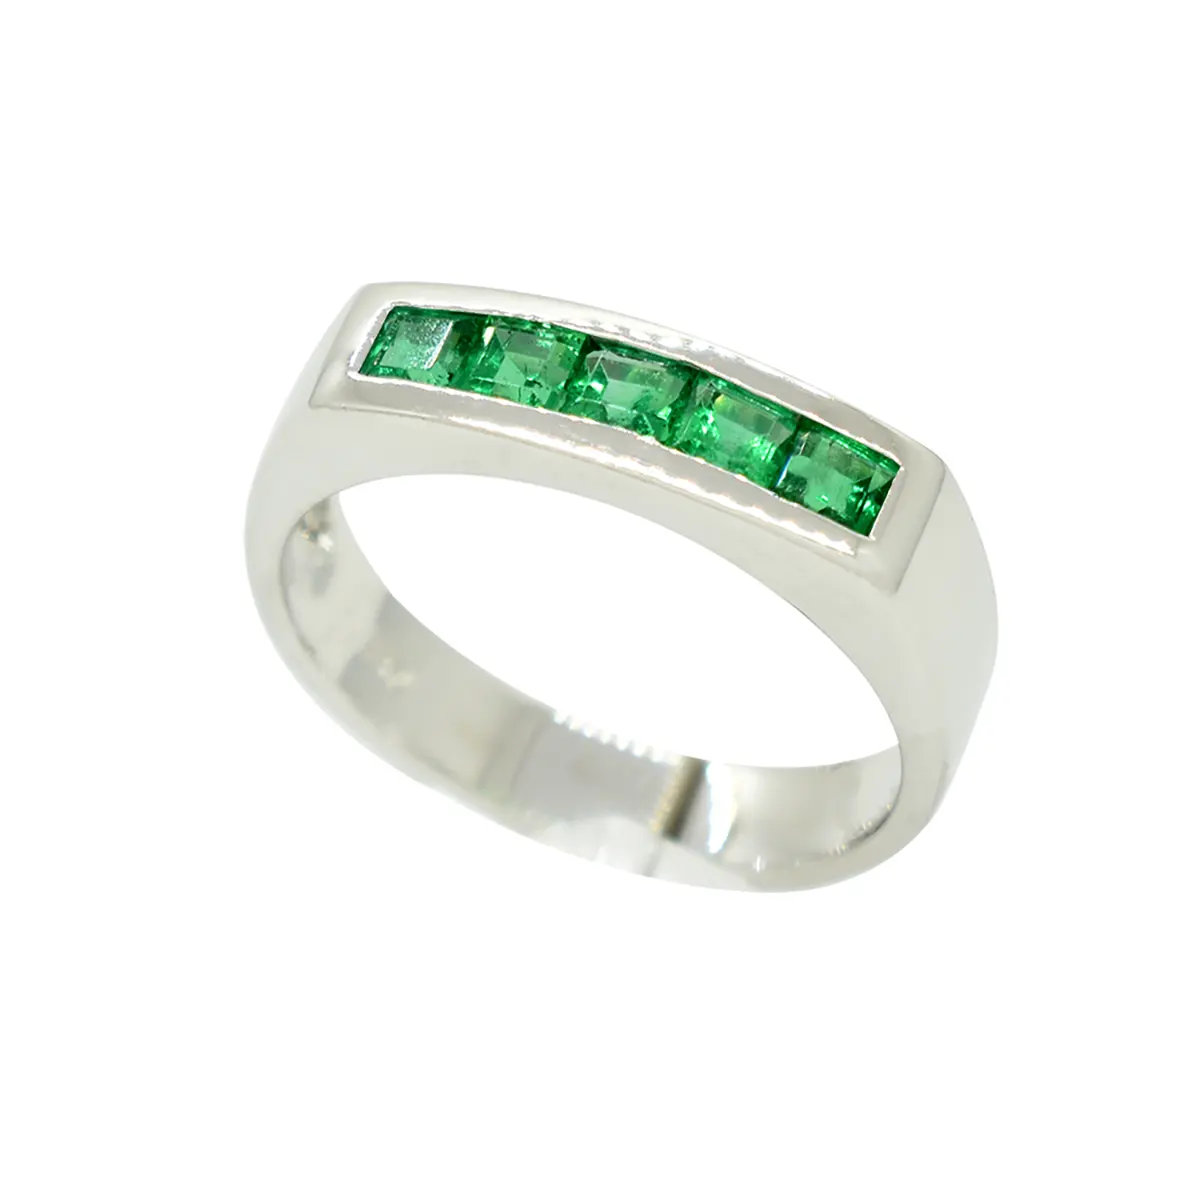 channel-set-emerald-wedding-band-with-square-emeralds-in-18k-white-gold